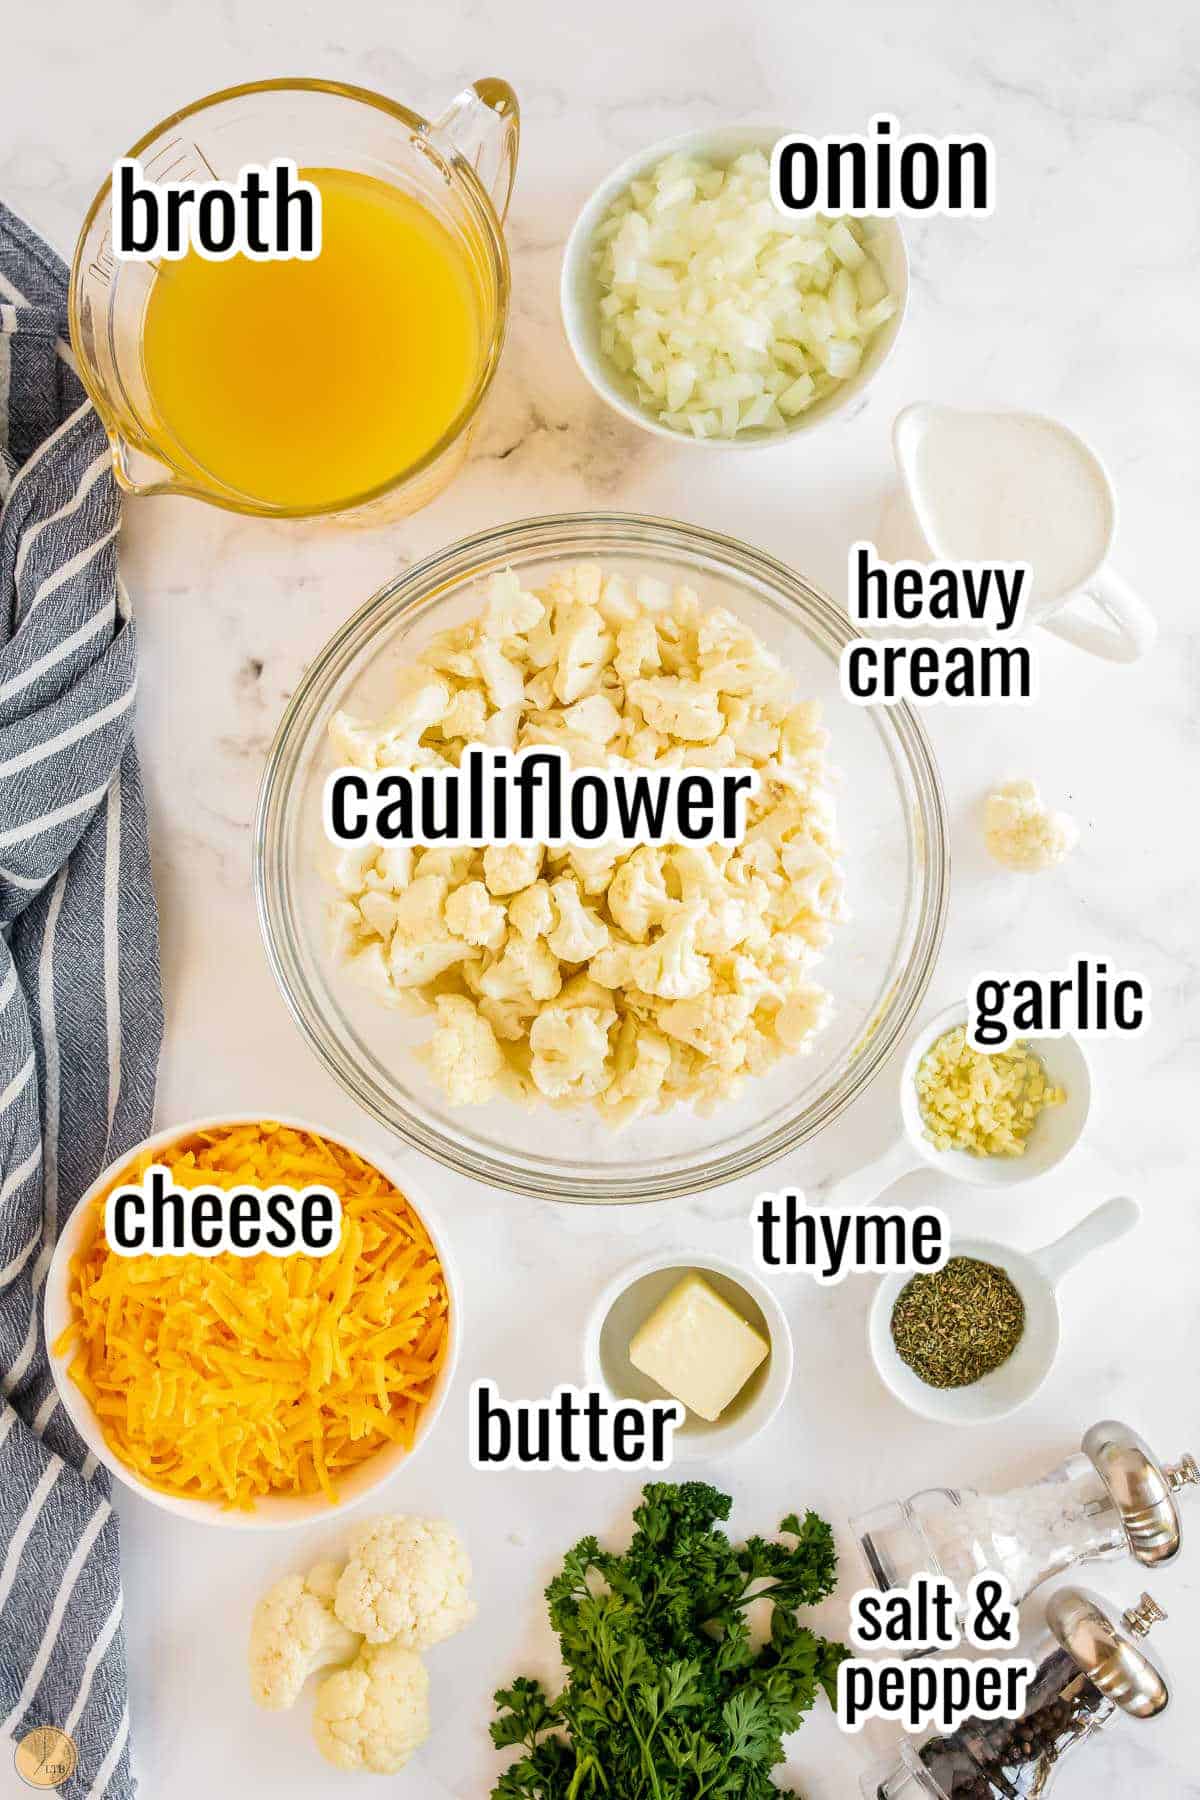 big head of cauliflower is one of the ingredients for this blended soup recipe